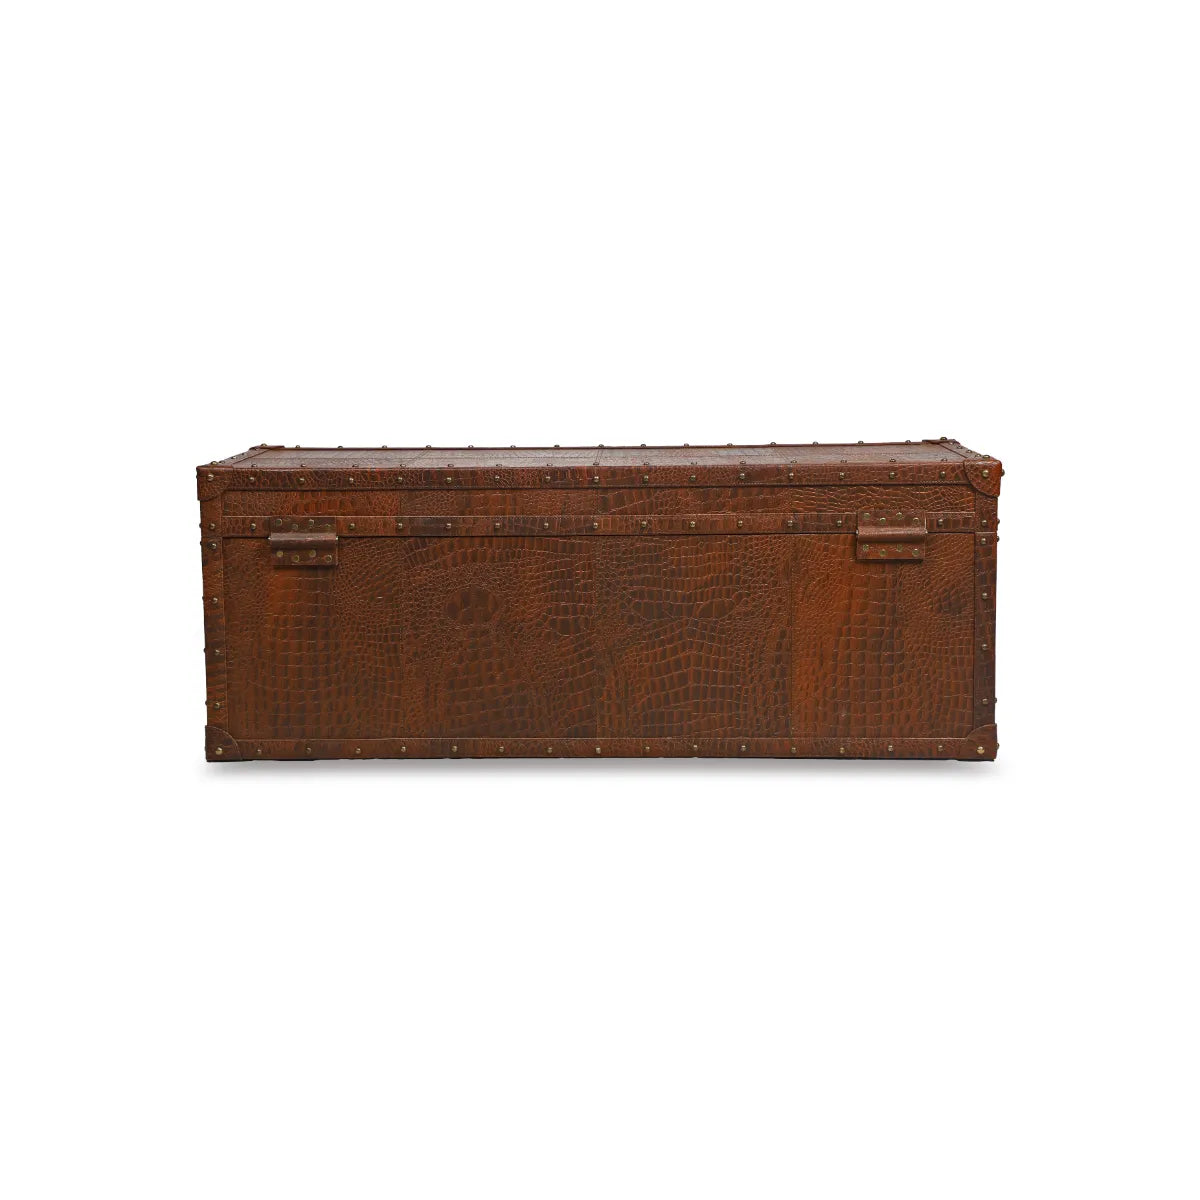 Genuine Leather Chest Of Drawers In Tan Colour